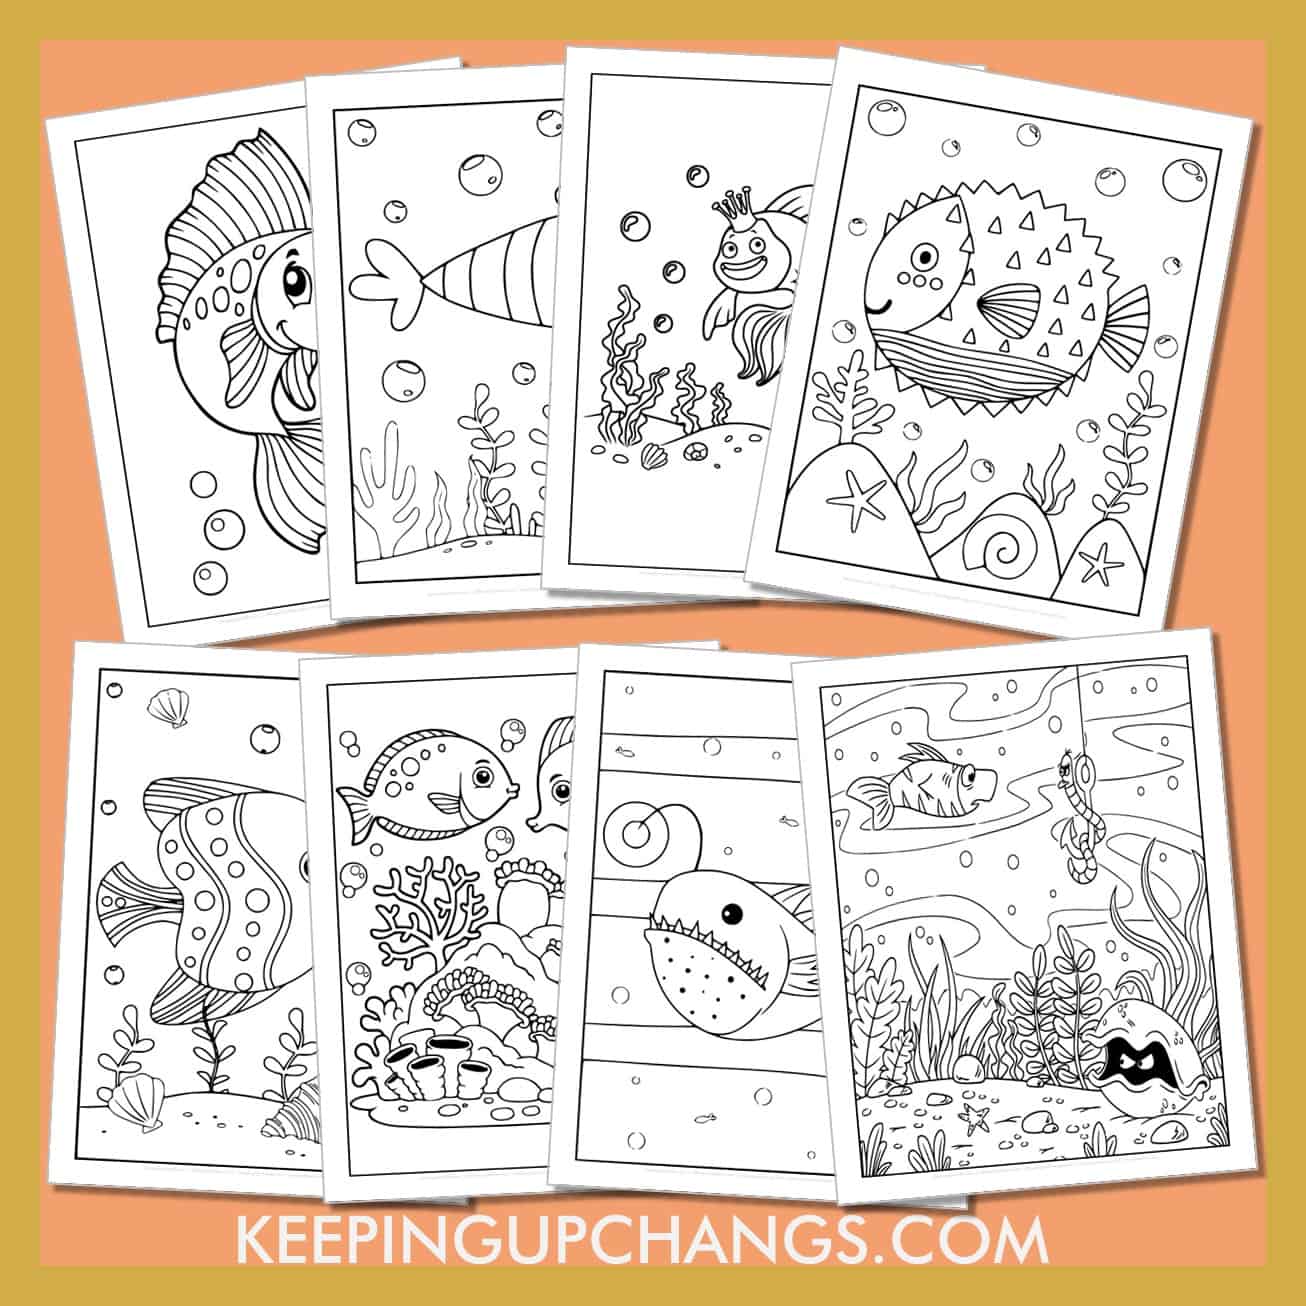 free fish pictures to color for toddlers, kids, adults.